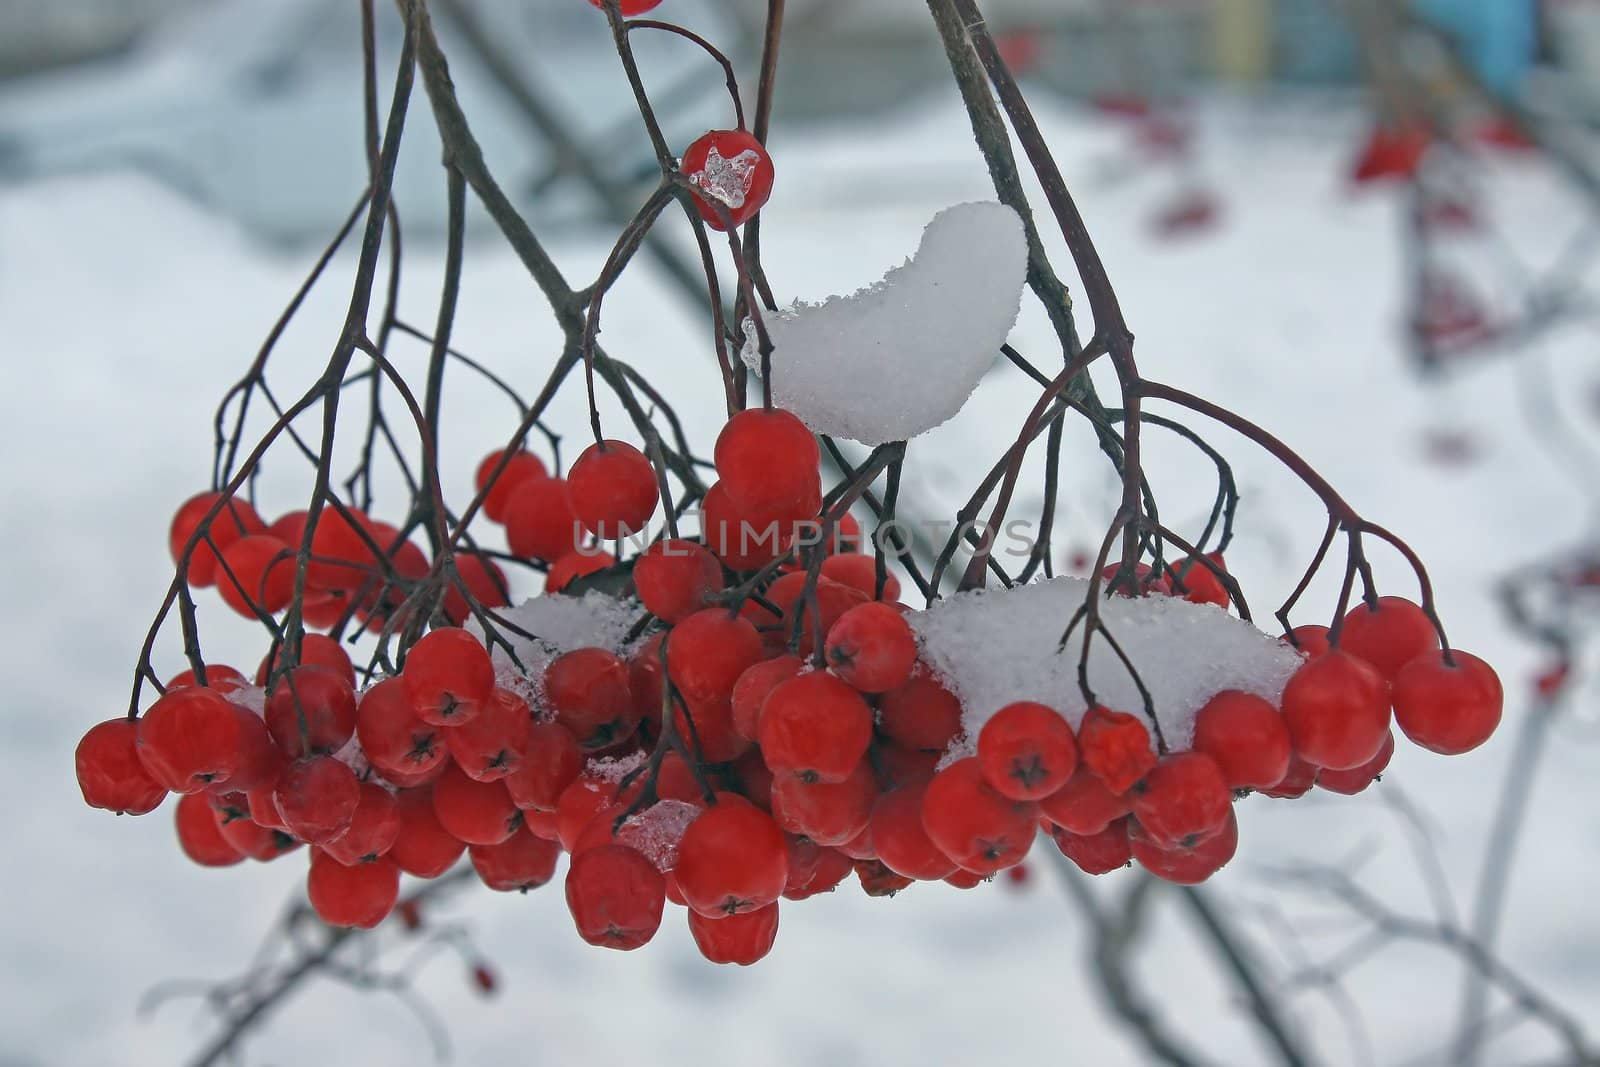 There has come winter. Snow has dropped out. On mountain ash berries snow lies. It is beautiful.
